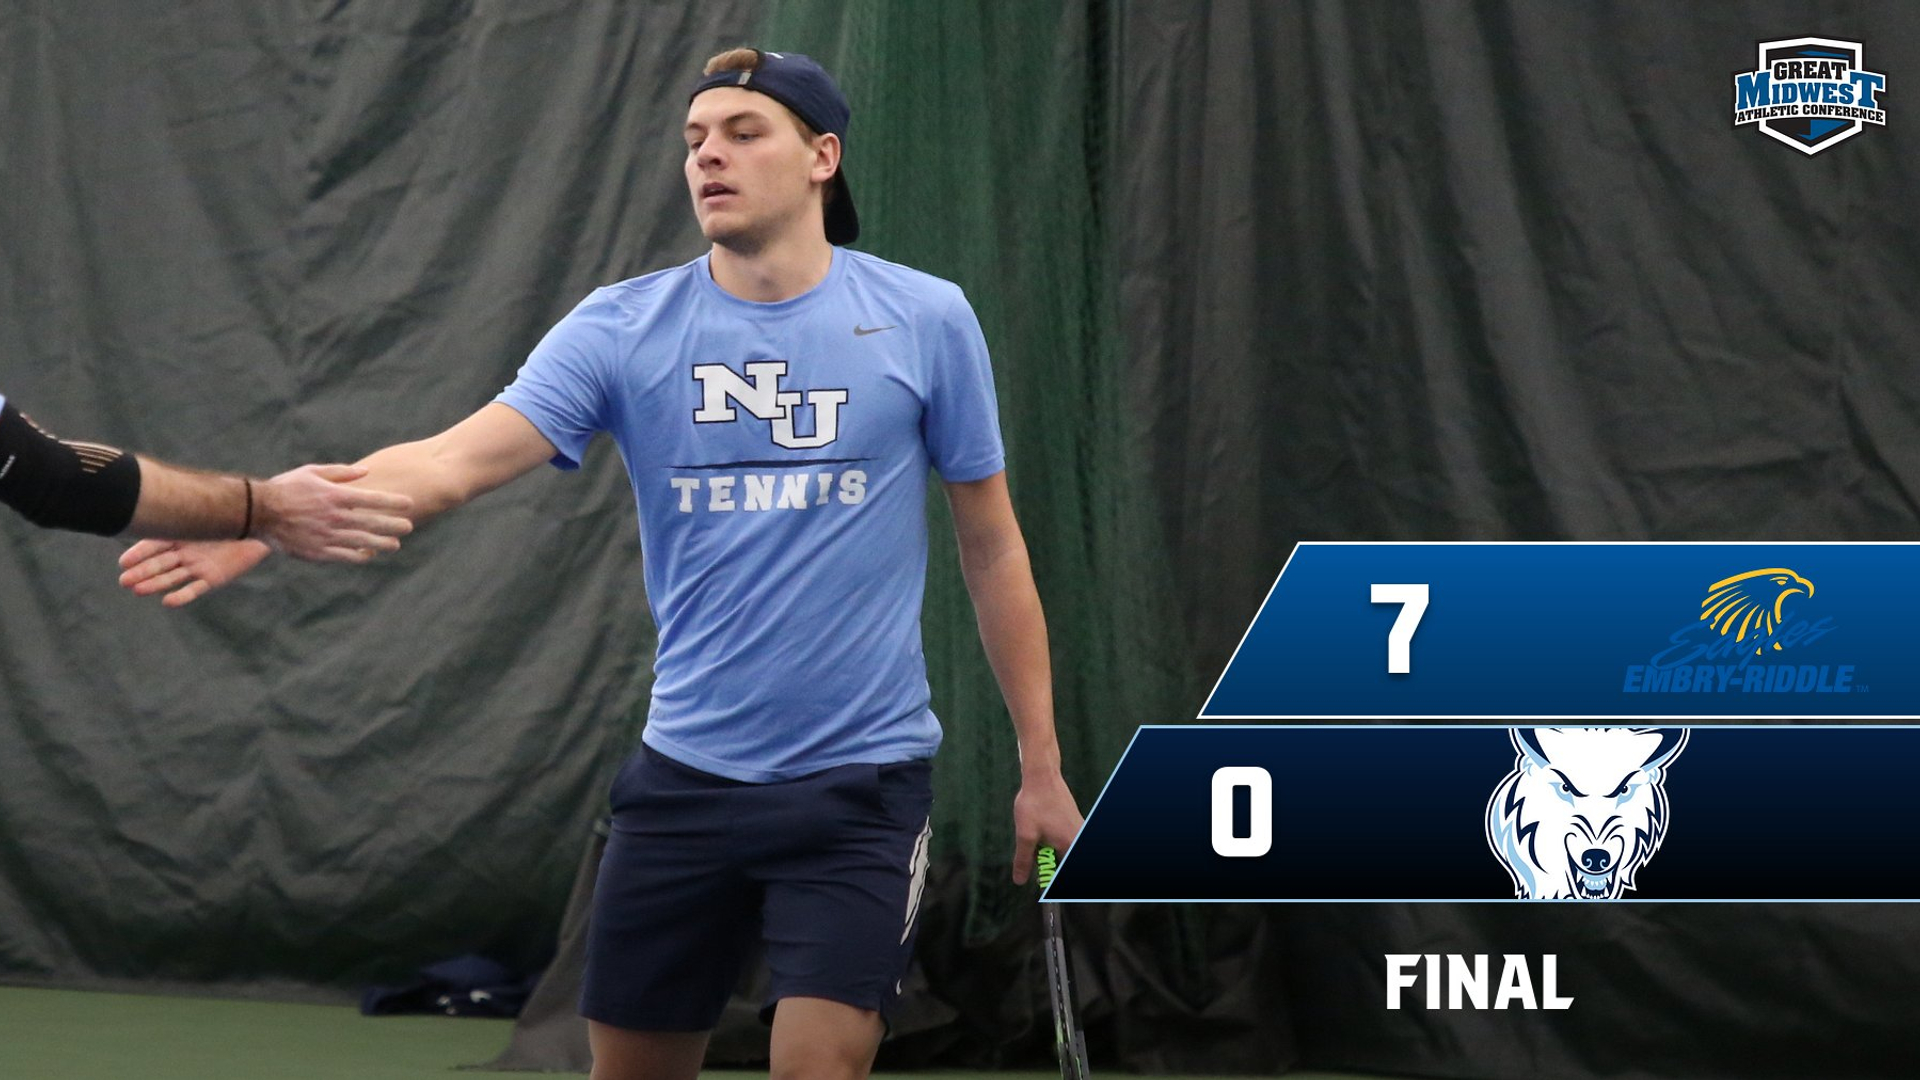 Men's Tennis Loses At Embry-Riddle 7-0